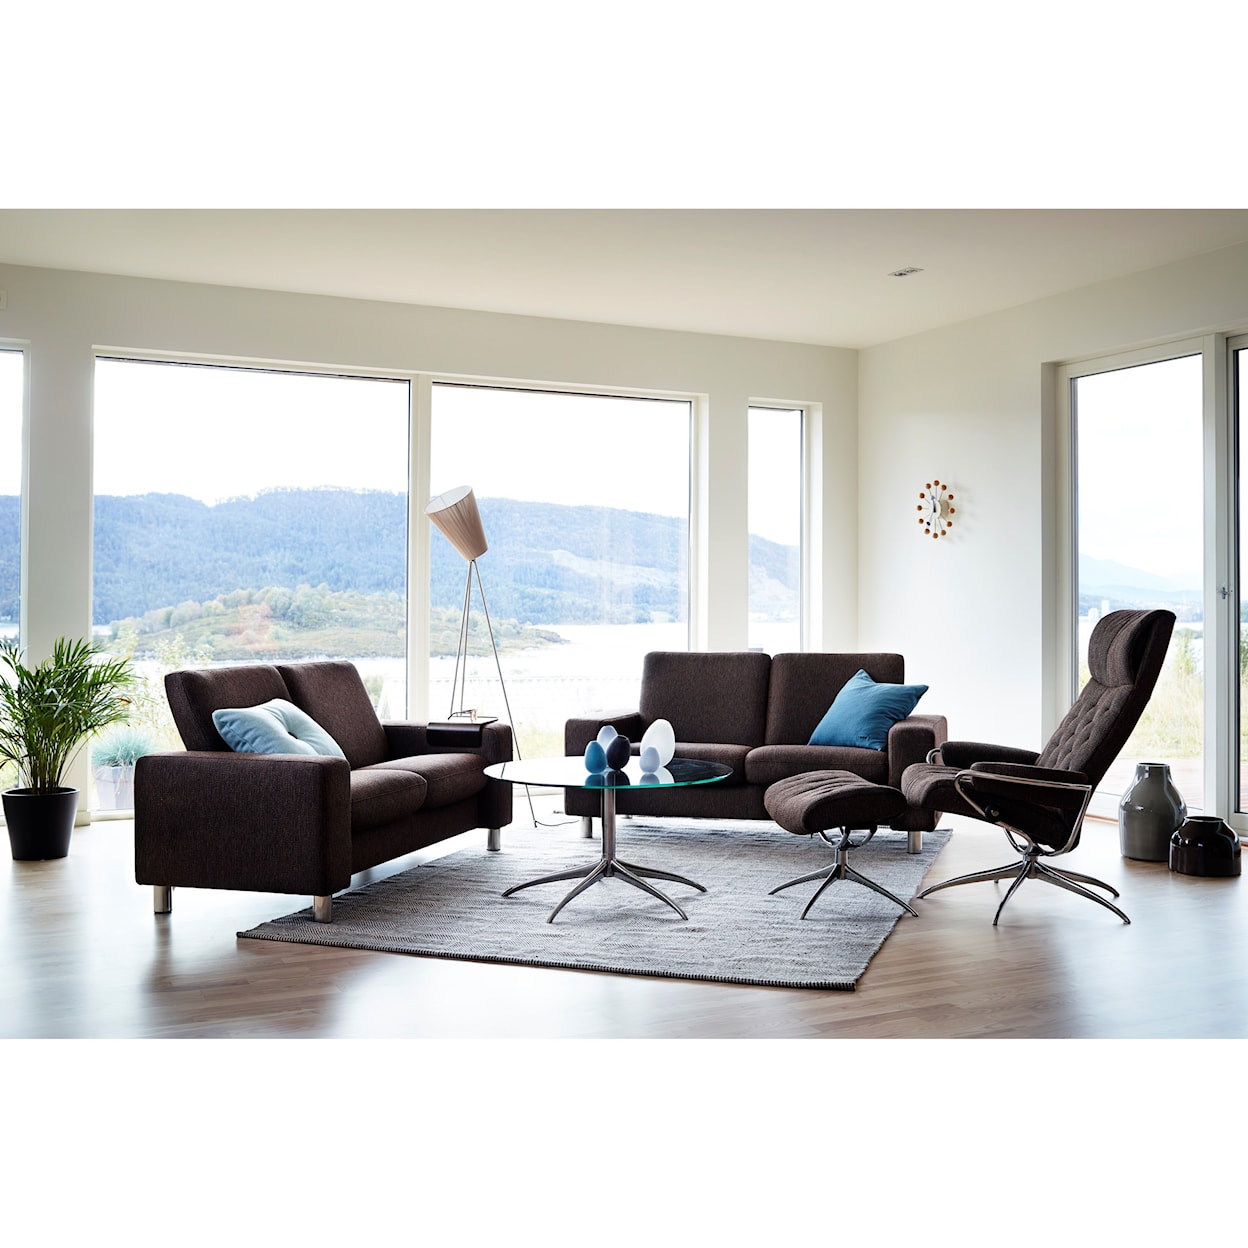 Stressless by Ekornes Tables Large Urban Table